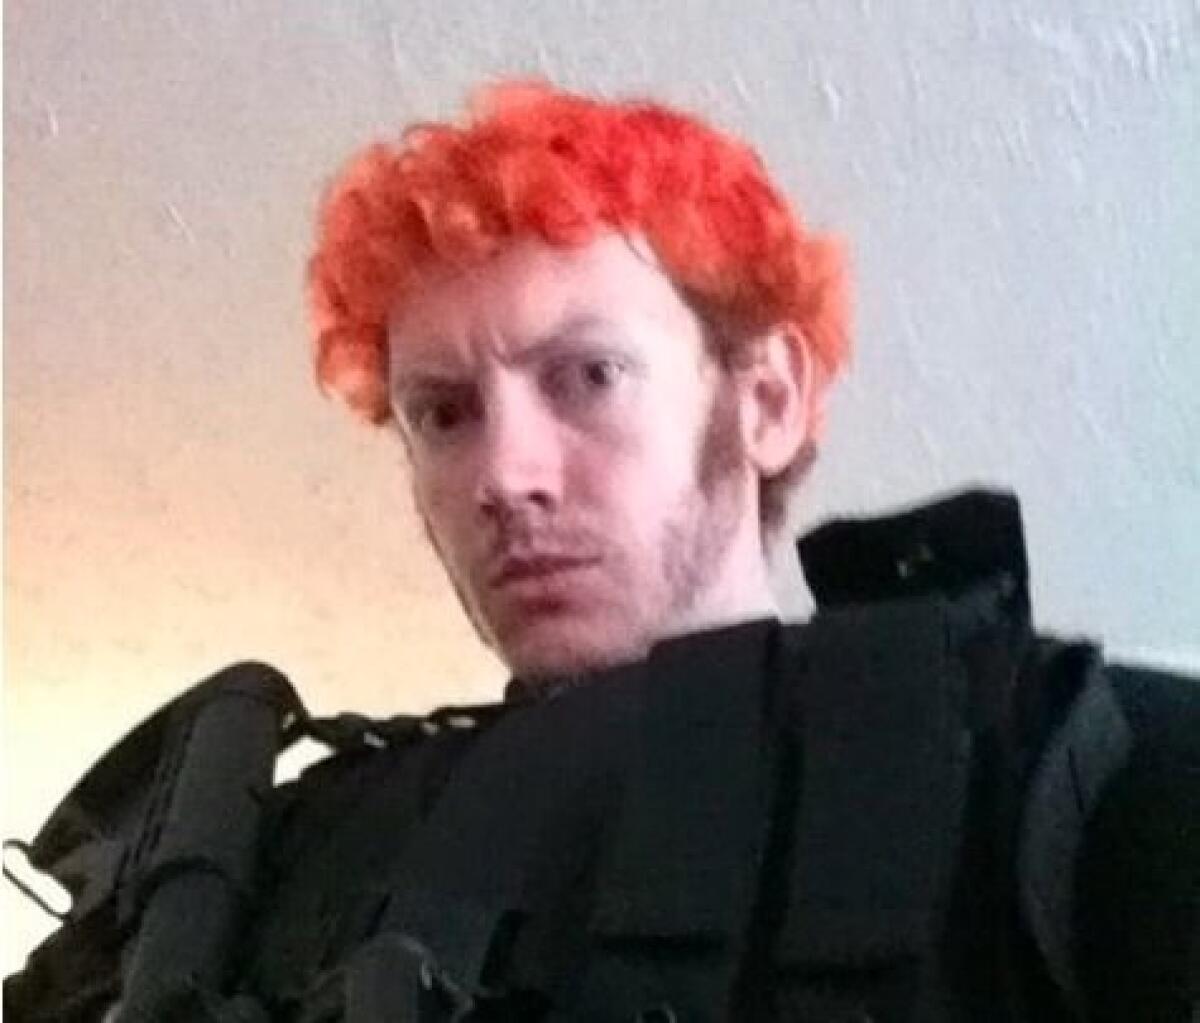 This image of mass murderer James Holmes was released this week by the Arapahoe District Attorney's Office.